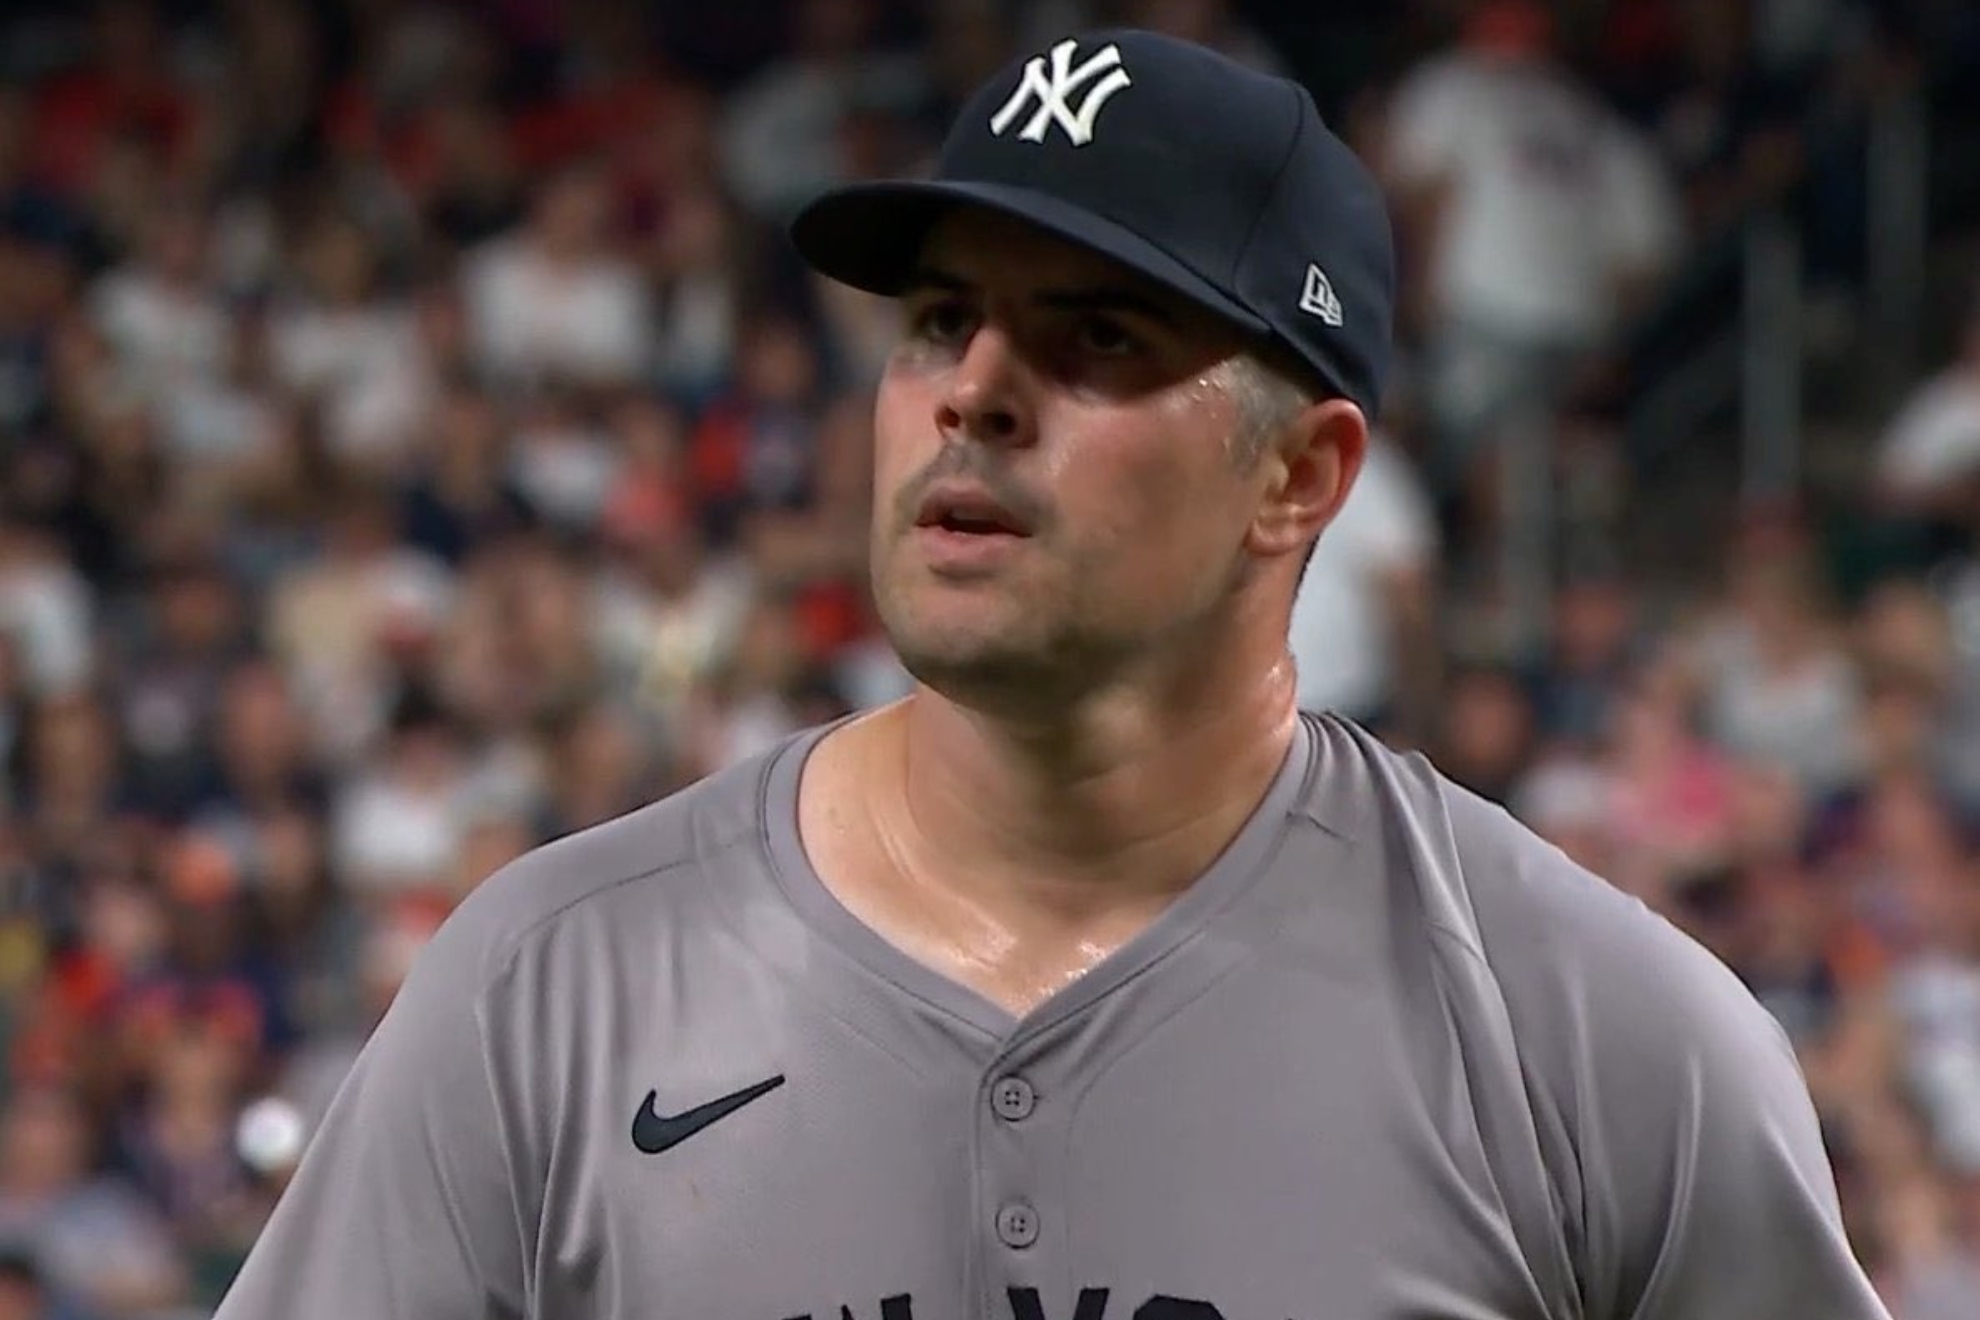 Yankees new Nike uniform fail causes uproar from MLB fans they look worse than Little League